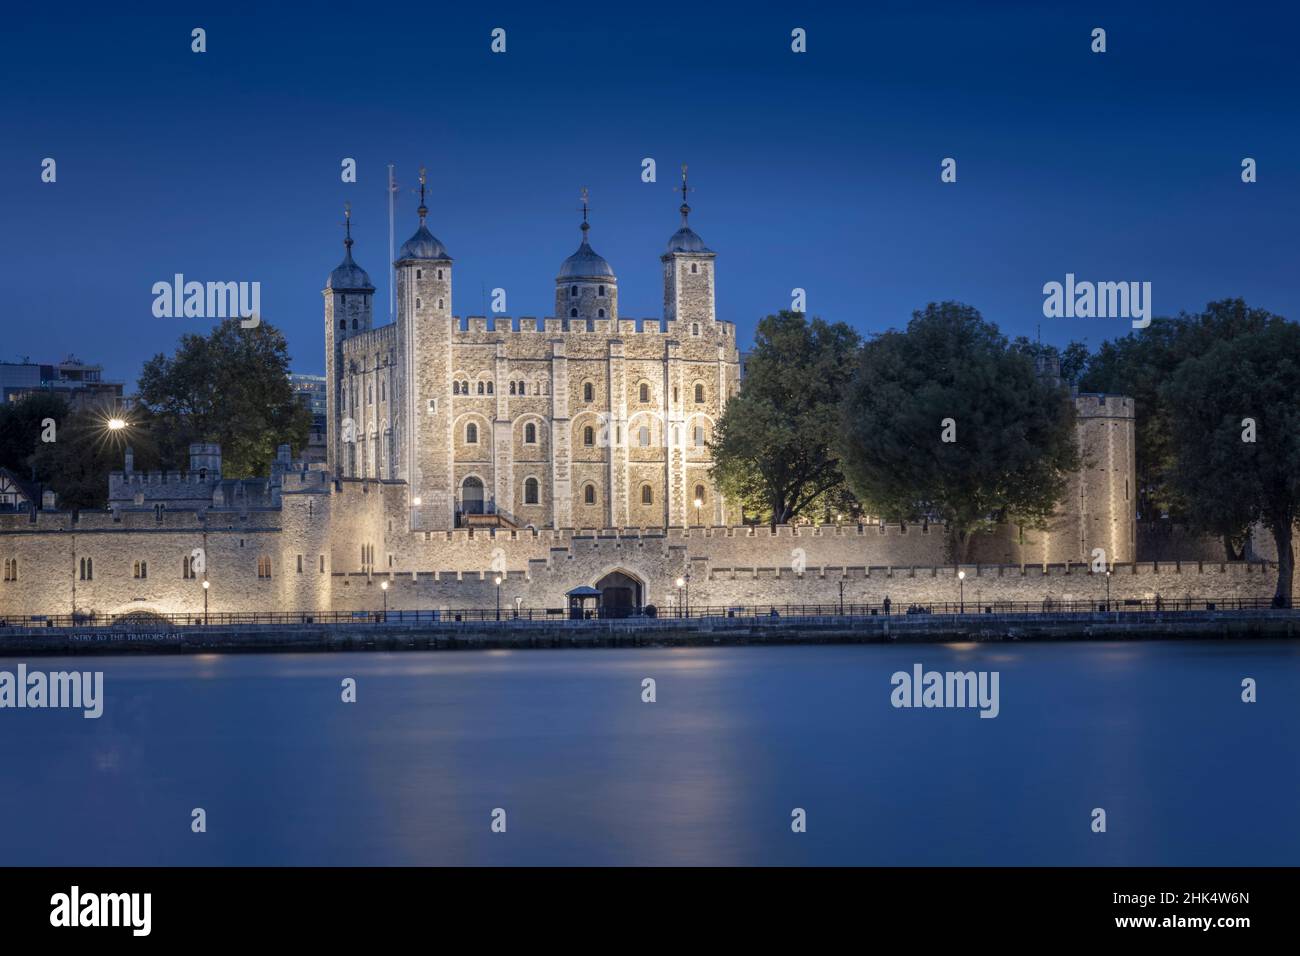 The Tower of London, 11th century medieval Norman castle that houses the Crown Jewels, UNESCO World Heritage Site, City of London, London, England Stock Photo